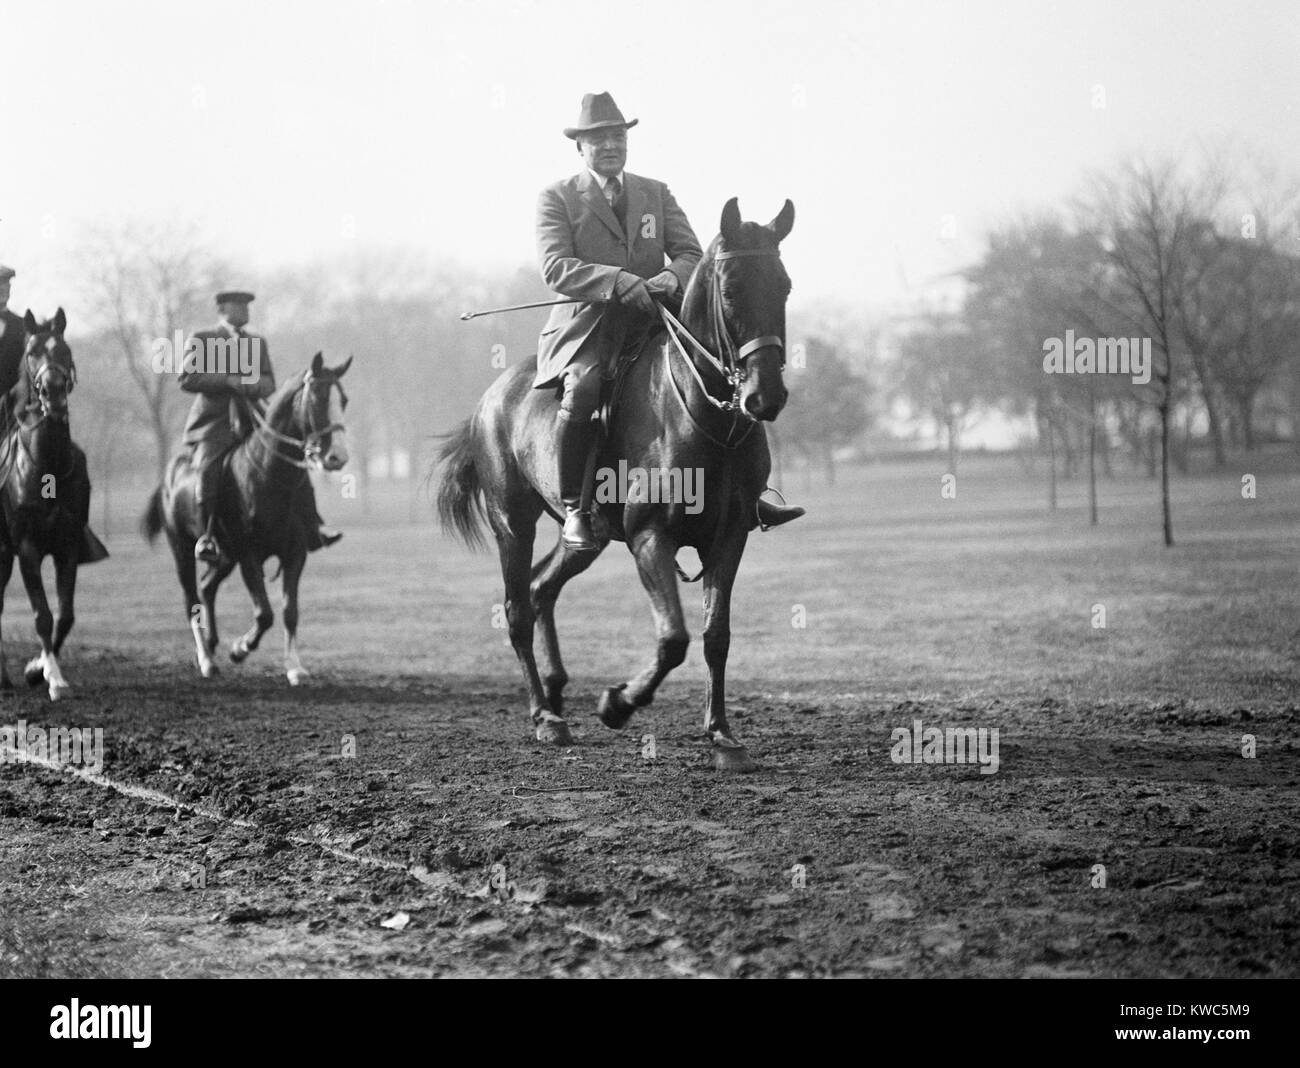 President Warren Harding riding a horse on the Capital Mall, ca. 1921-22. (BSLOC 2015 15 24) Stock Photo